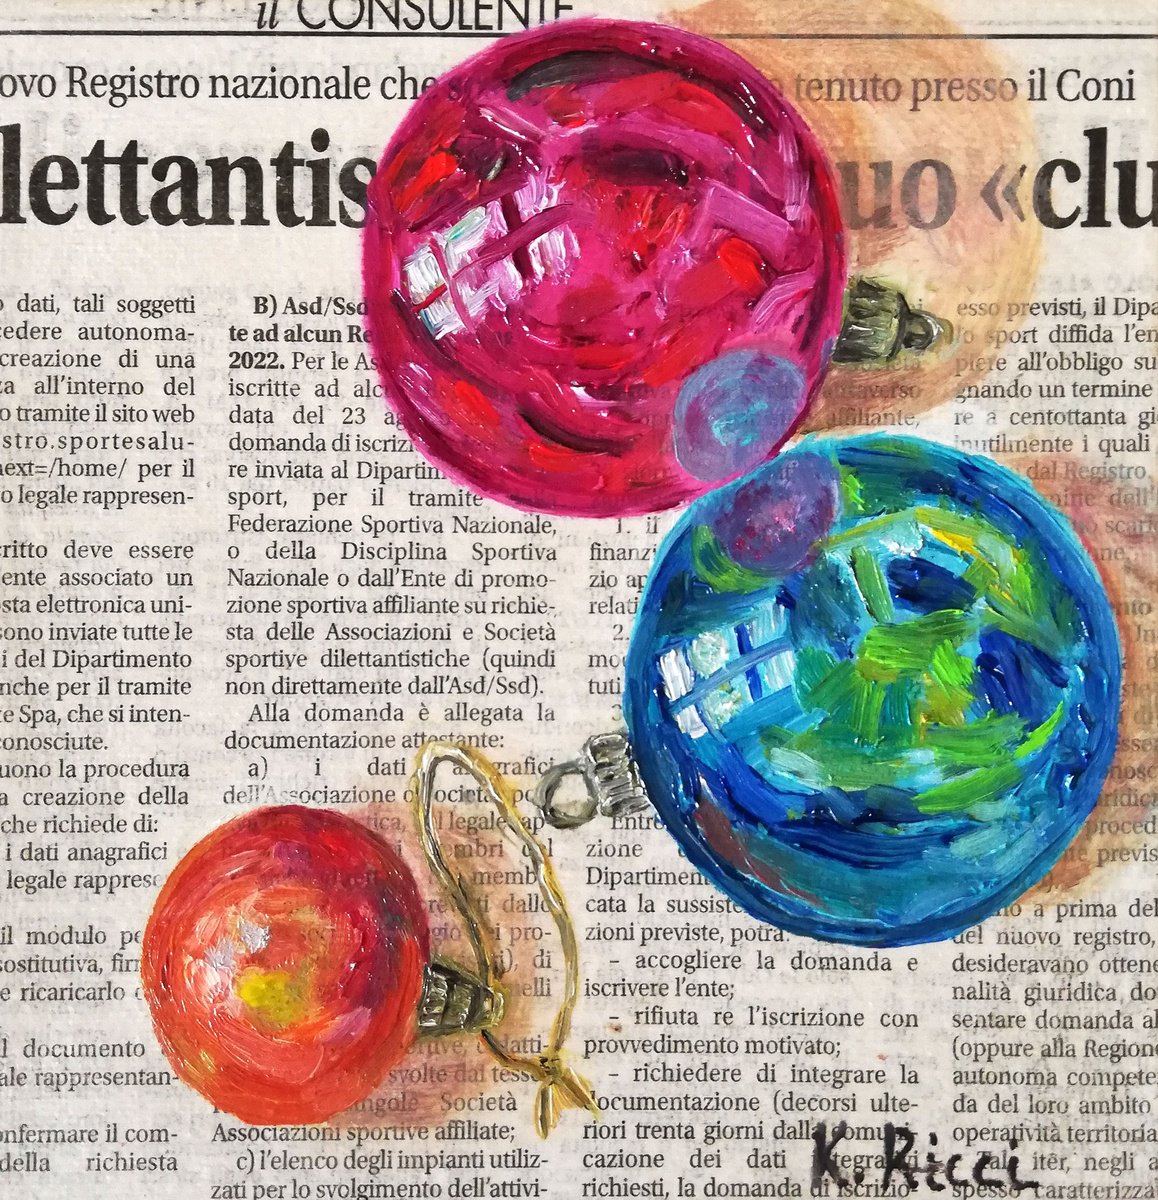 Christmas Balls on Newspaper Original Oil on Canvas Board Painting 6 by 6 inches (15x15... by Katia Ricci